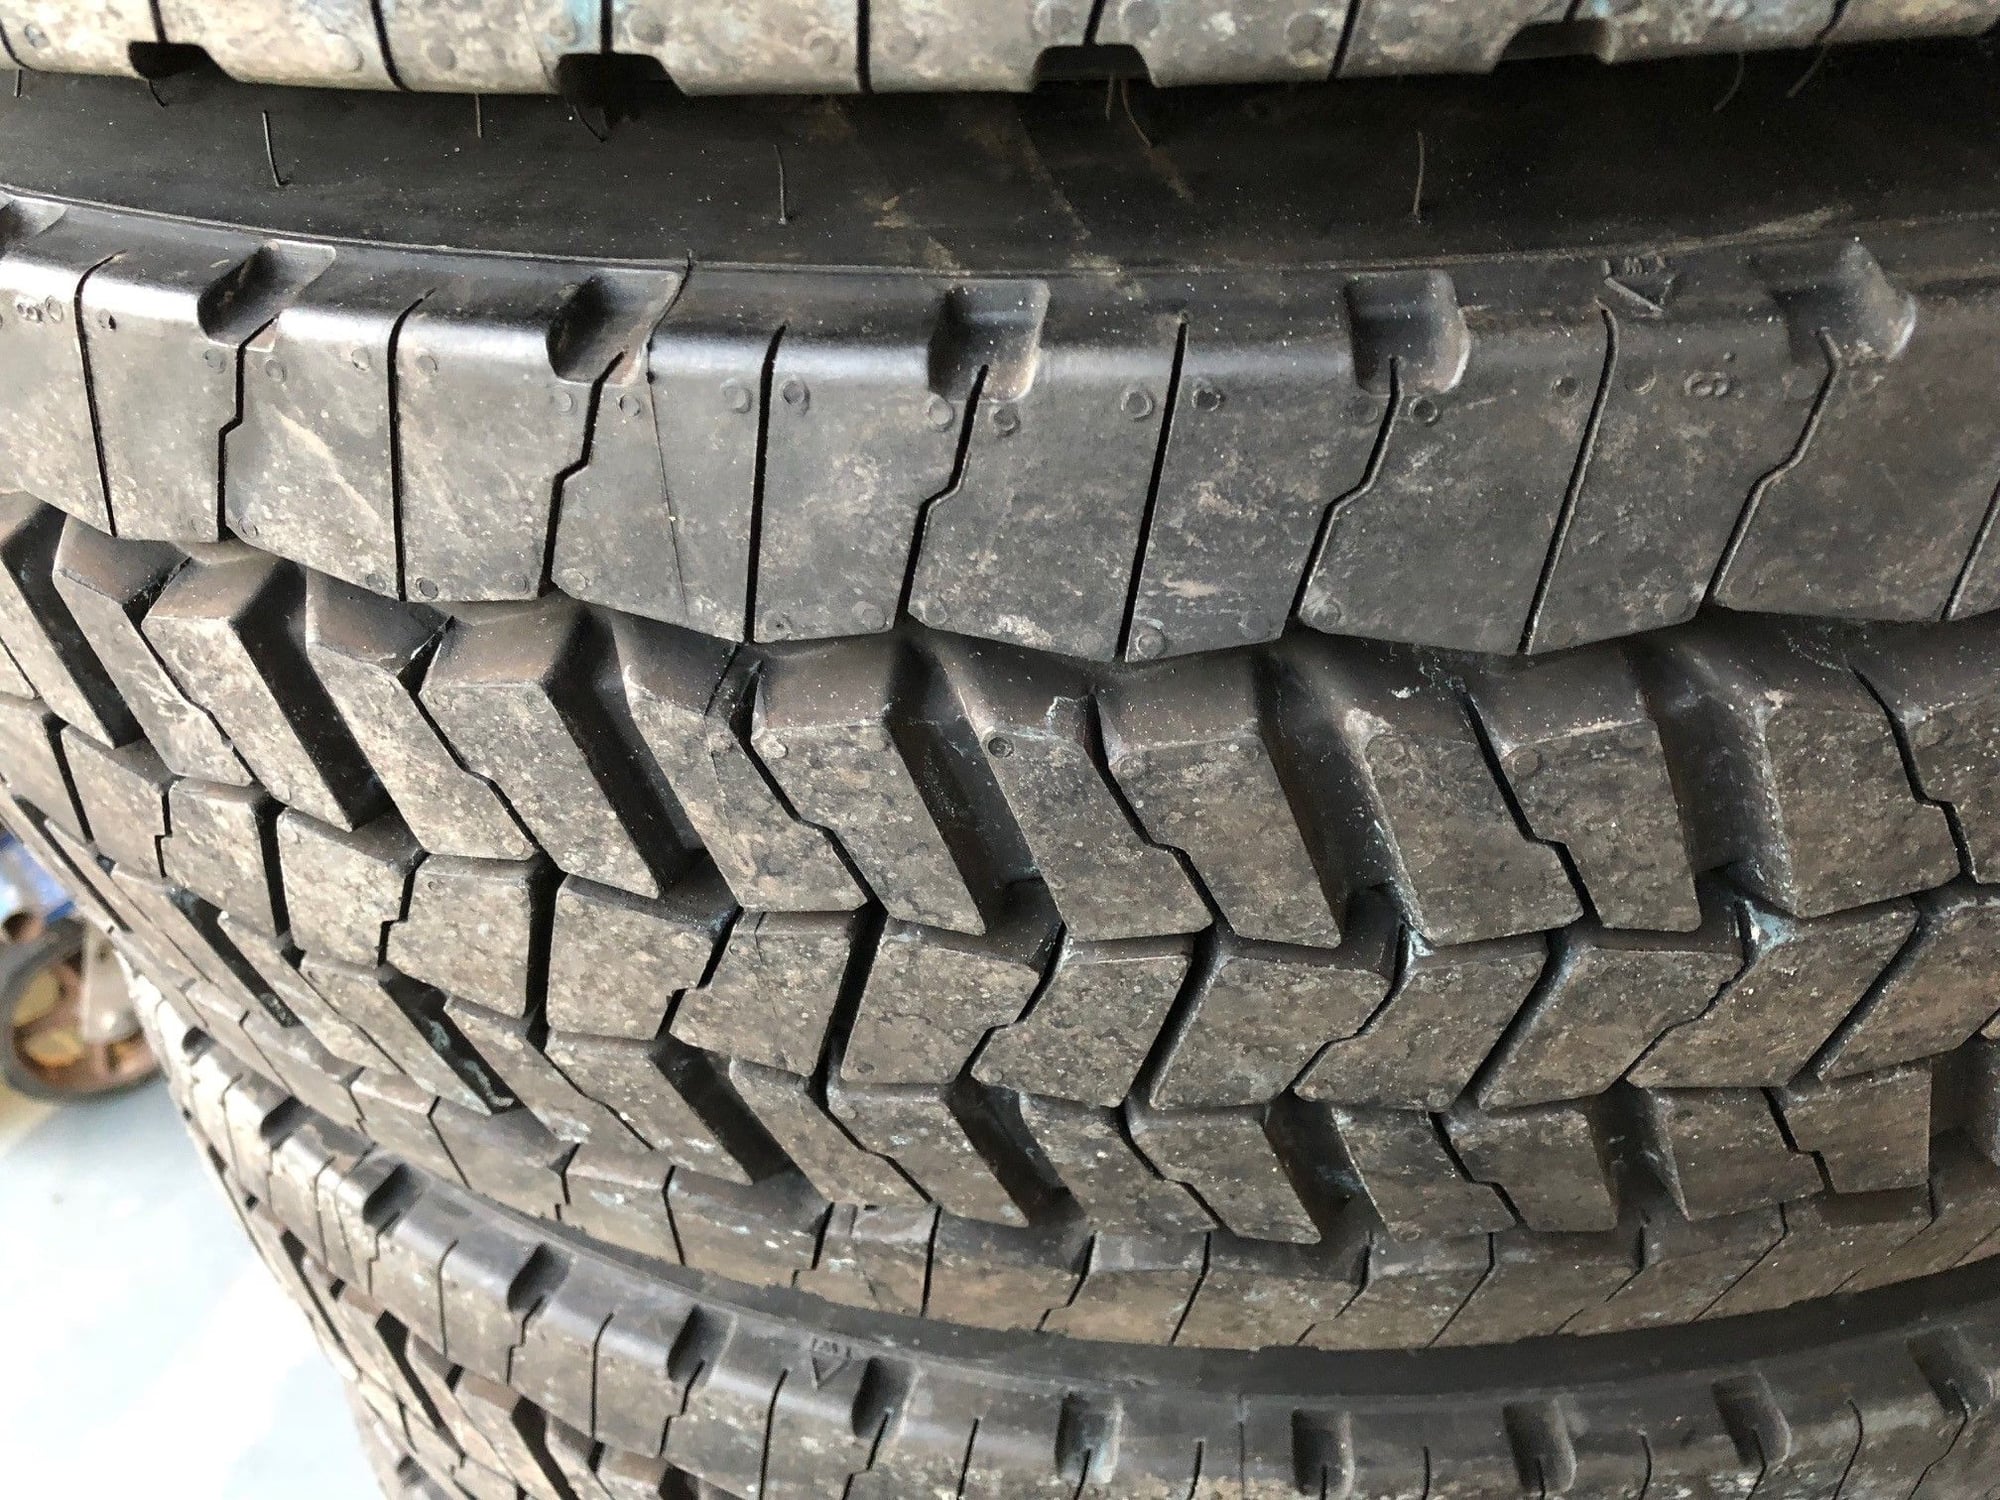 Wheels and Tires/Axles - Continental HSR 225/70R 19.5 - Used - 2017 to 2019 Ford F-450 Super Duty - Fallston, MD 21047, United States